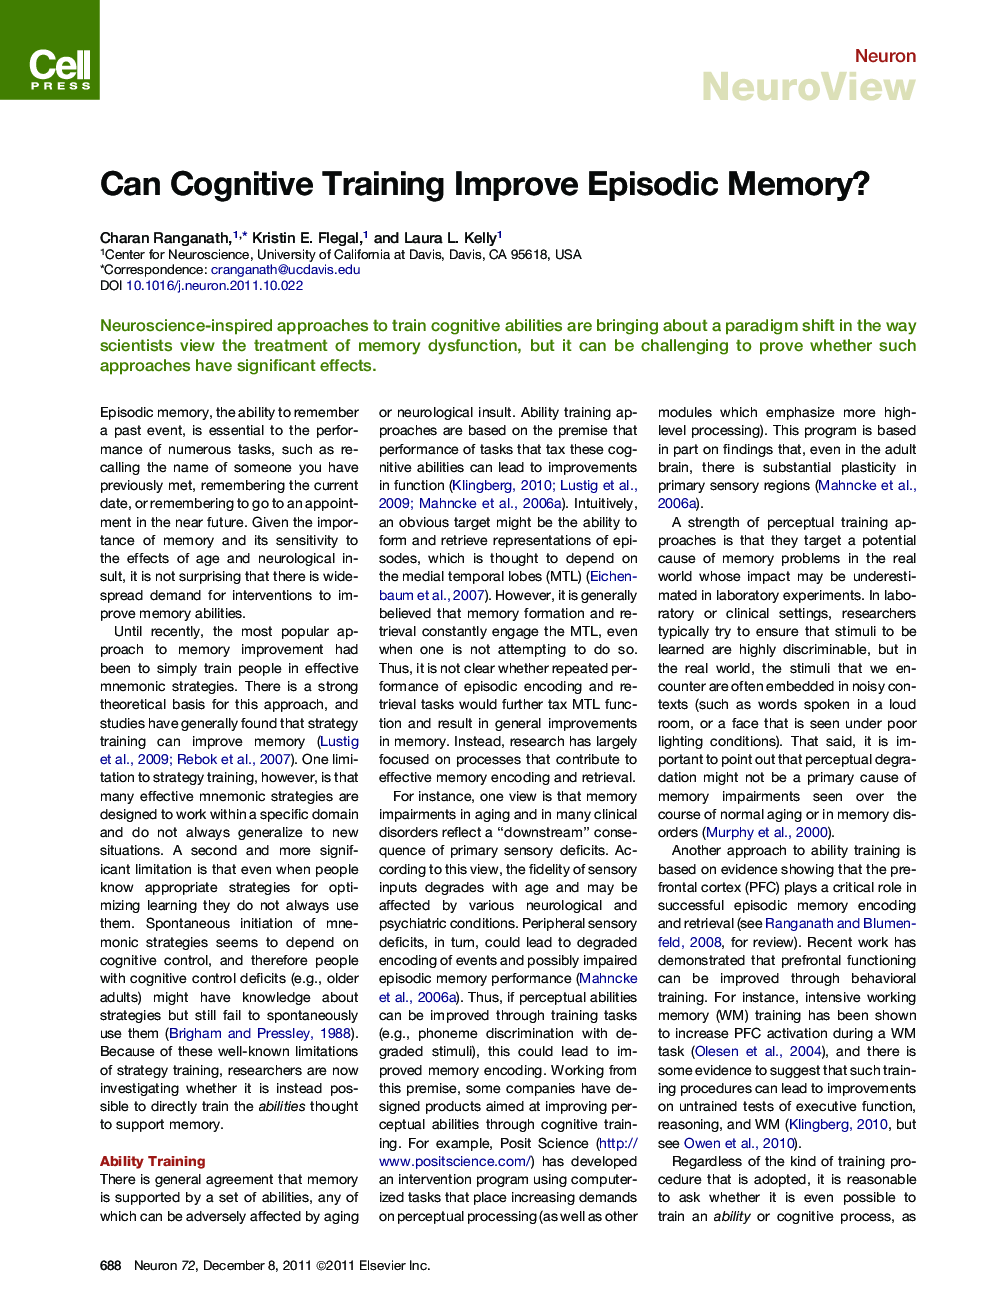 Can Cognitive Training Improve Episodic Memory?